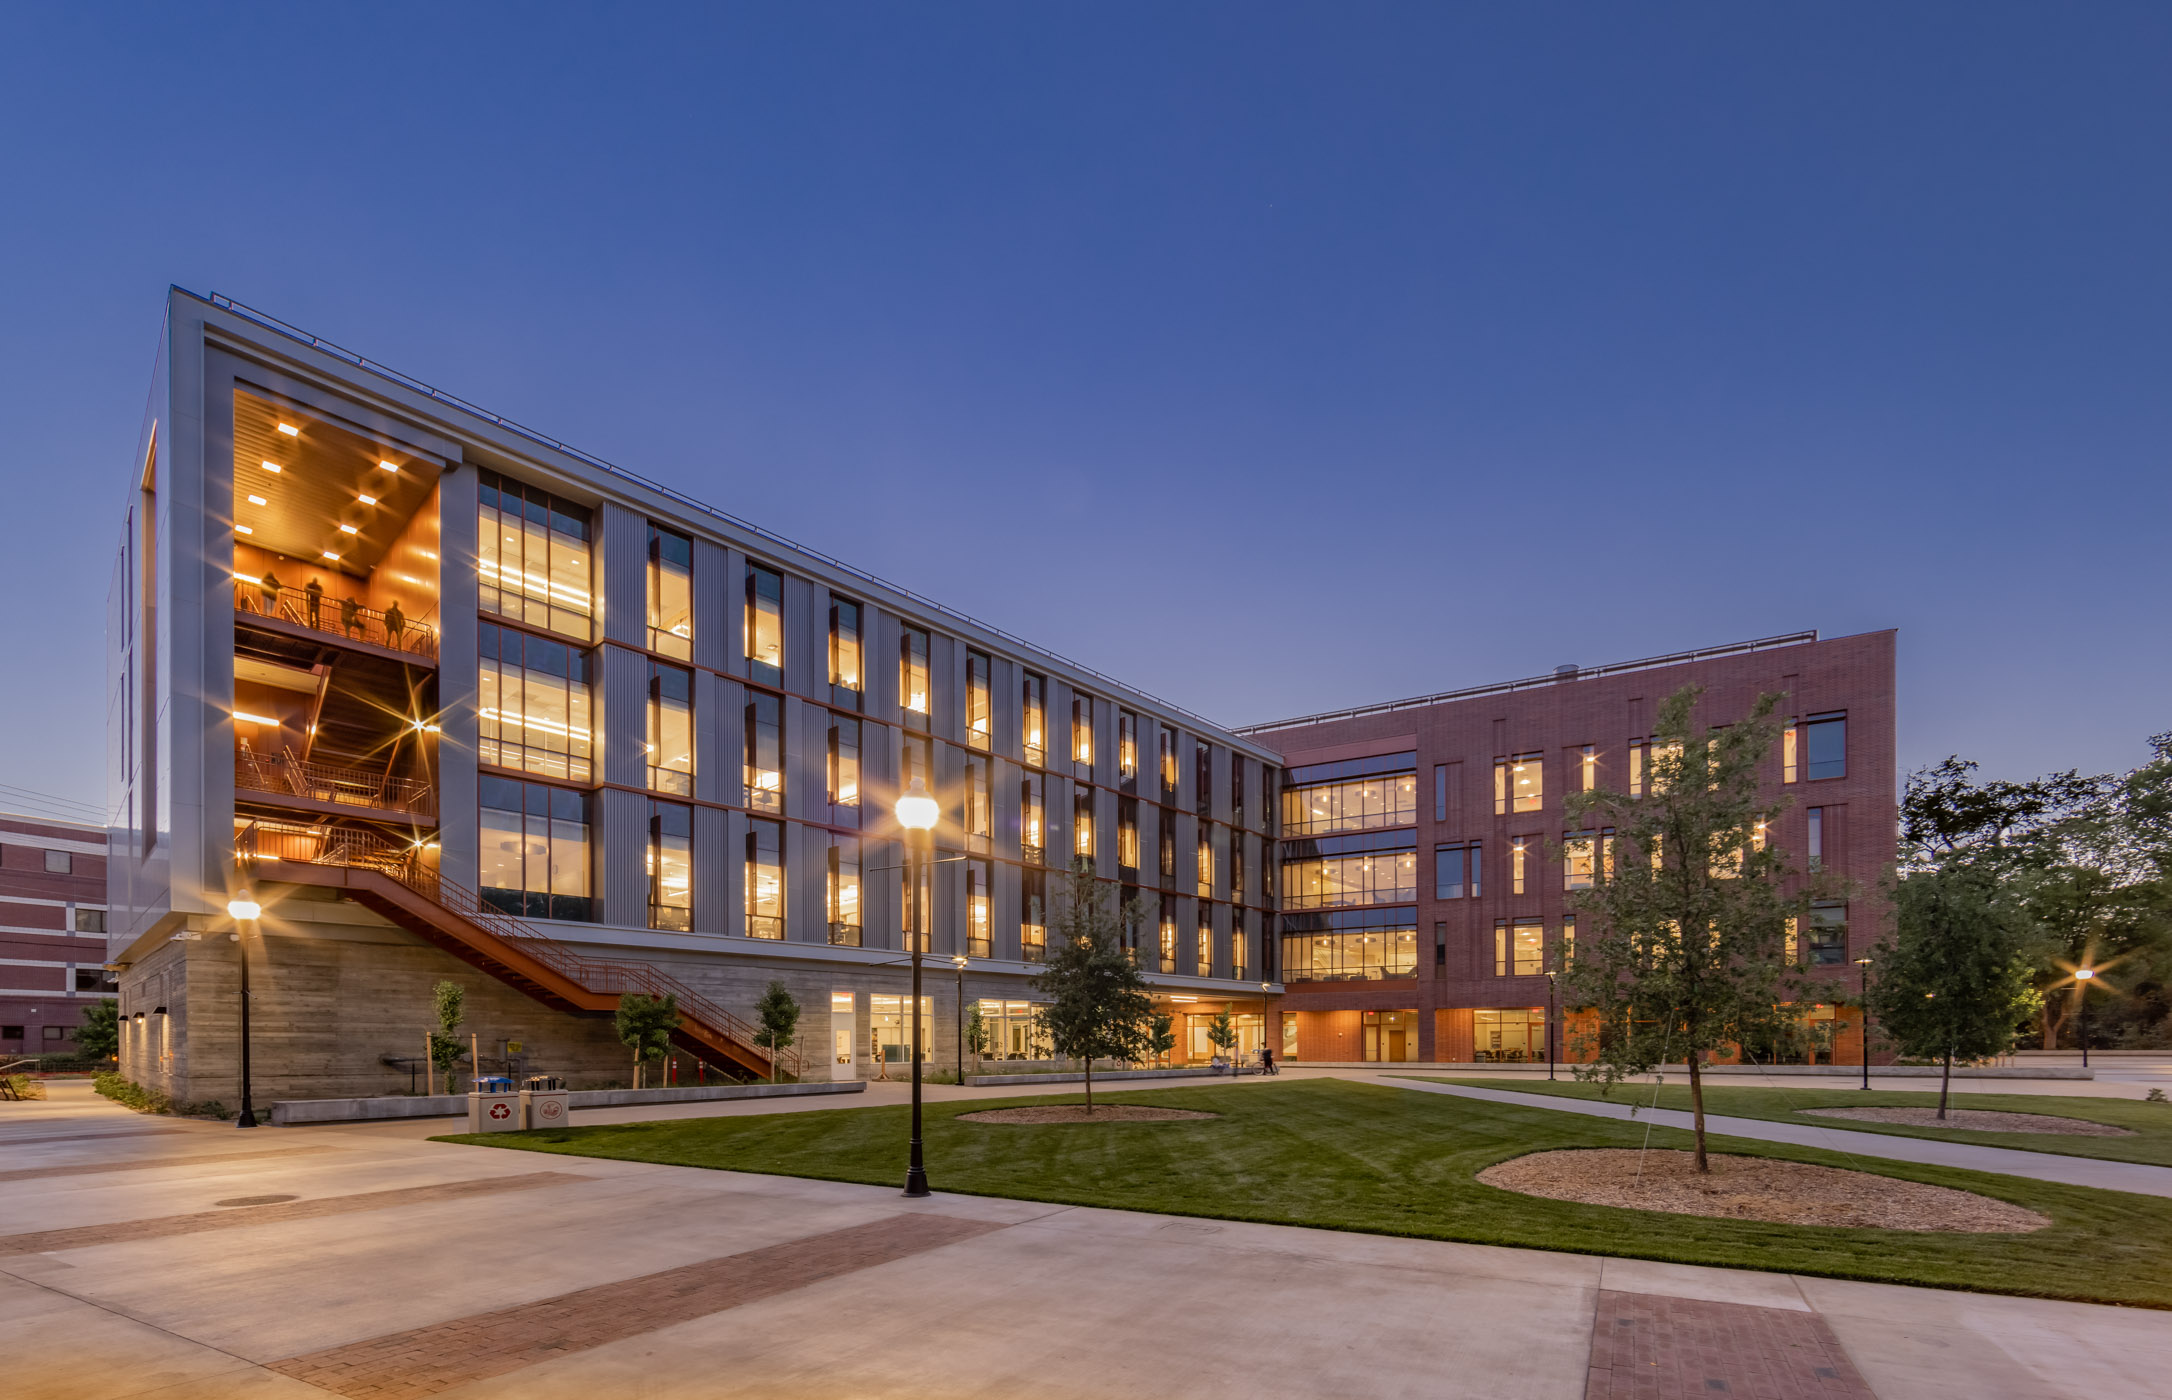 4-21_Smithgroup_ChicoState-2344-Edit_InstitutionsGallery